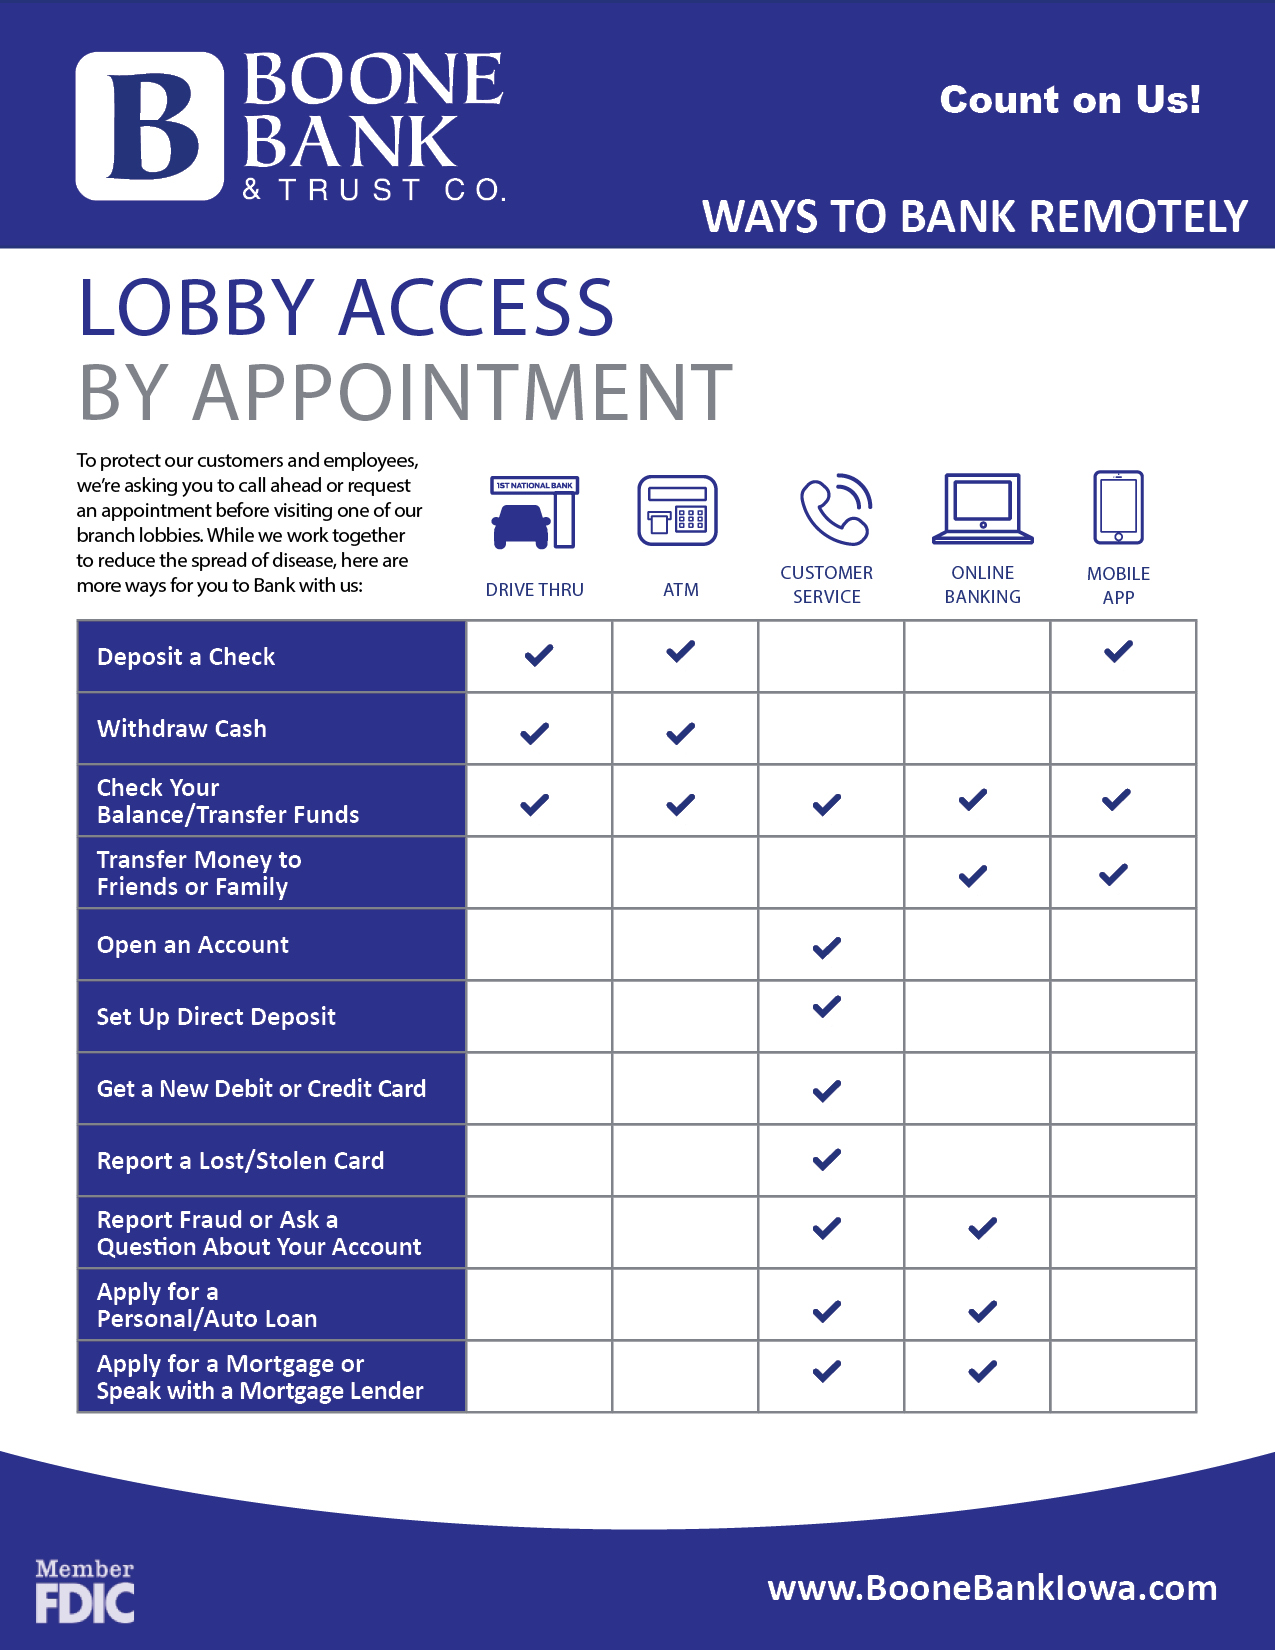 Ways to Bank Remotely